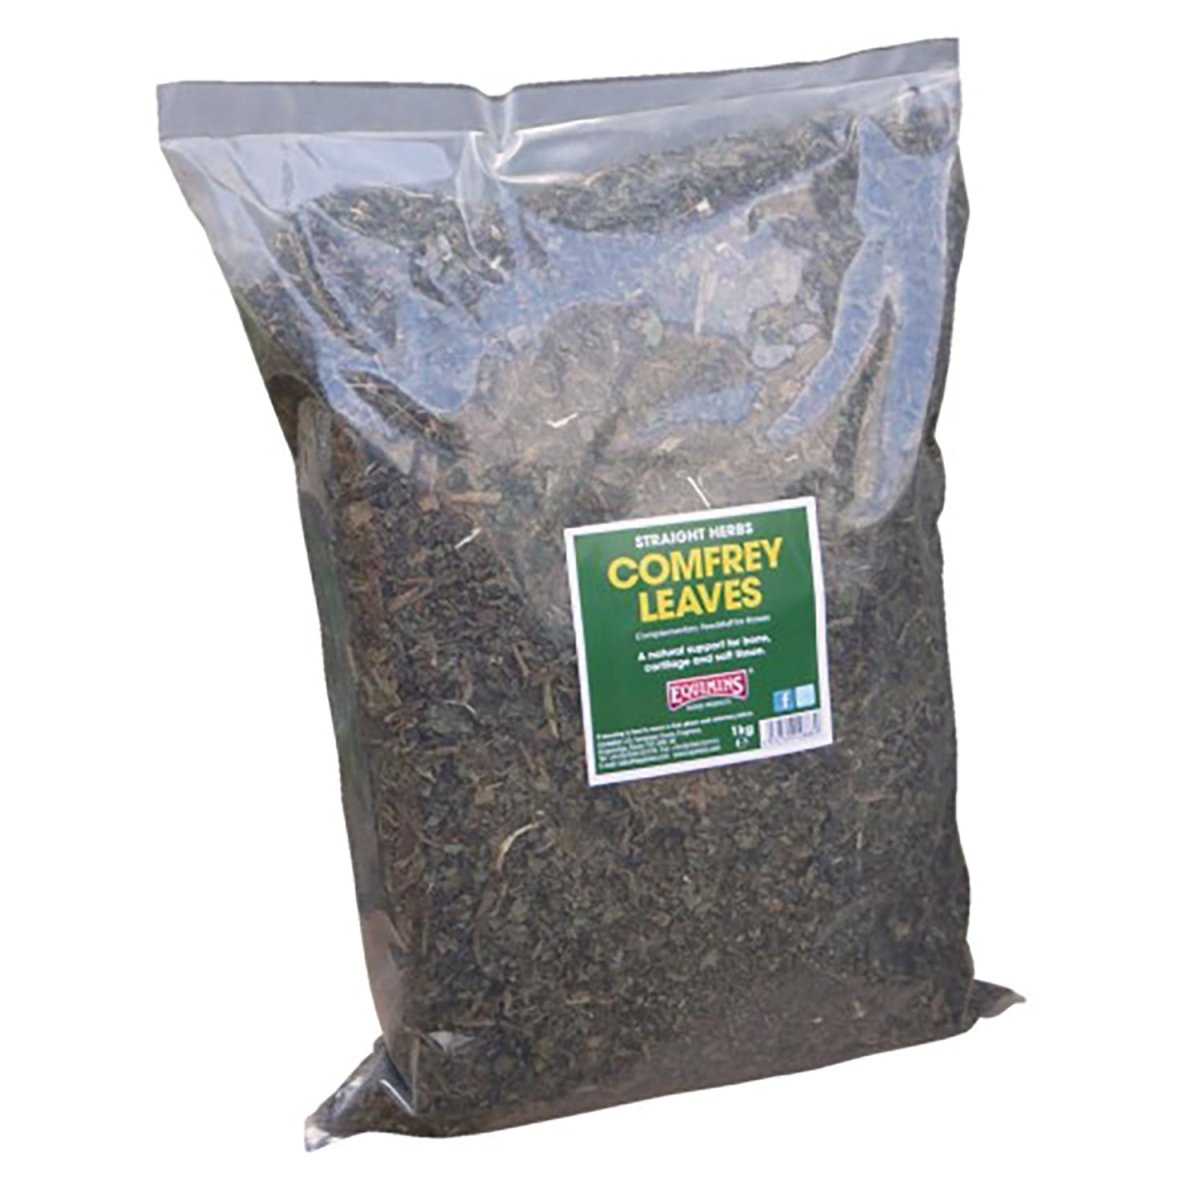 Equimins Straight Herbs Comfrey Leaves - 1Kg -